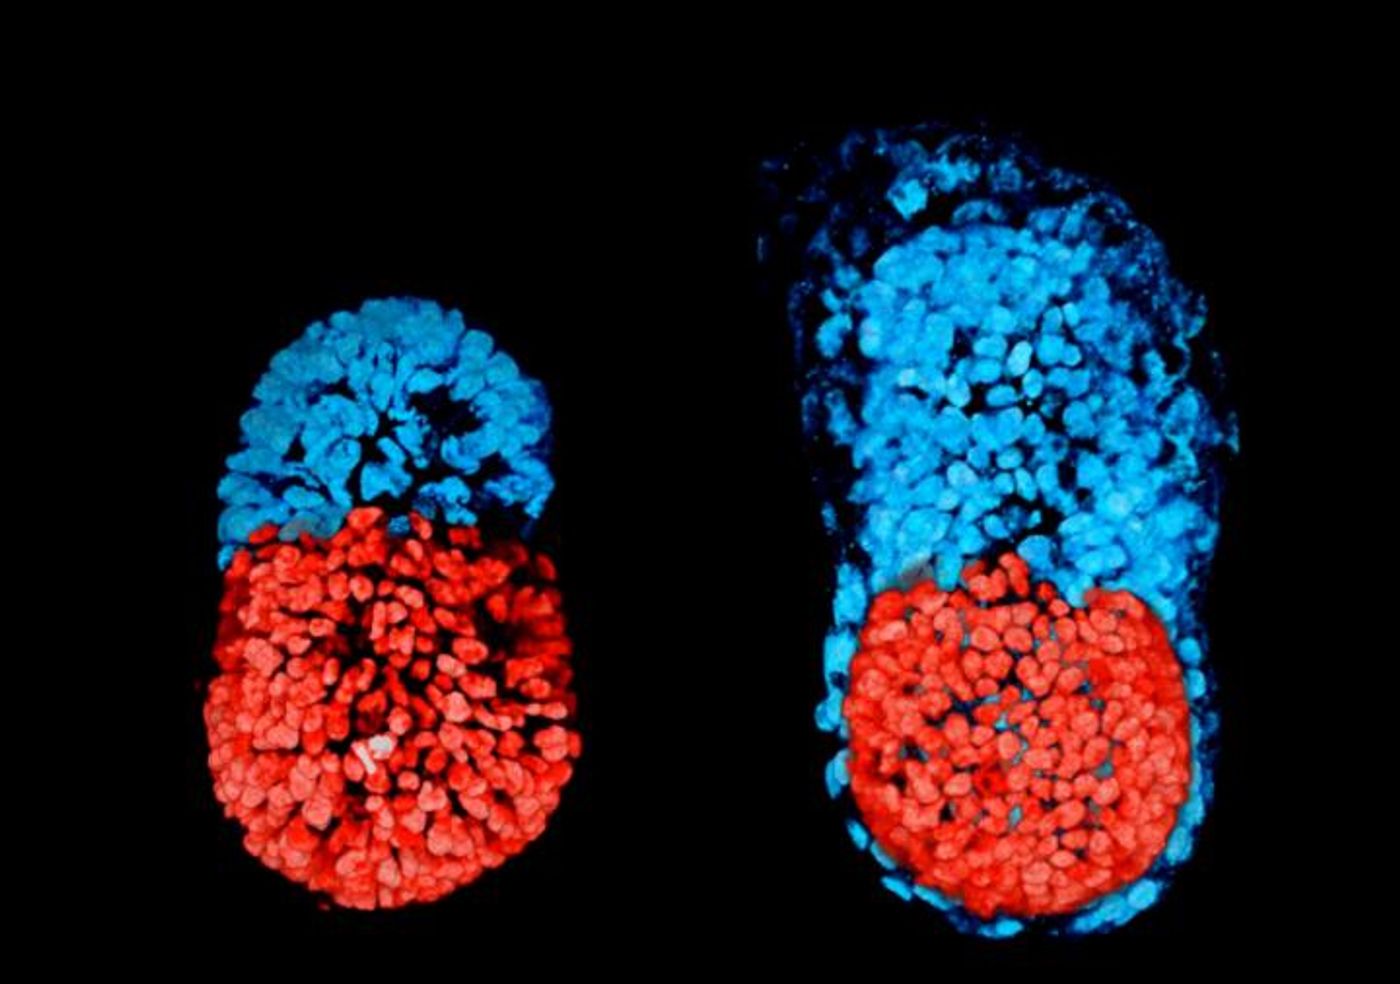 This image shows stem cell-modeled mouse embryo at 96 hours (left); Mouse embryo cultured in vitro for 48 hours from the blastocyst stage (right). The red part is embryonic and the blue extra-embryonic. / Credit: Sarah Harrison and Gaelle Recher, Zernicka-Goetz Lab, University of Cambridge